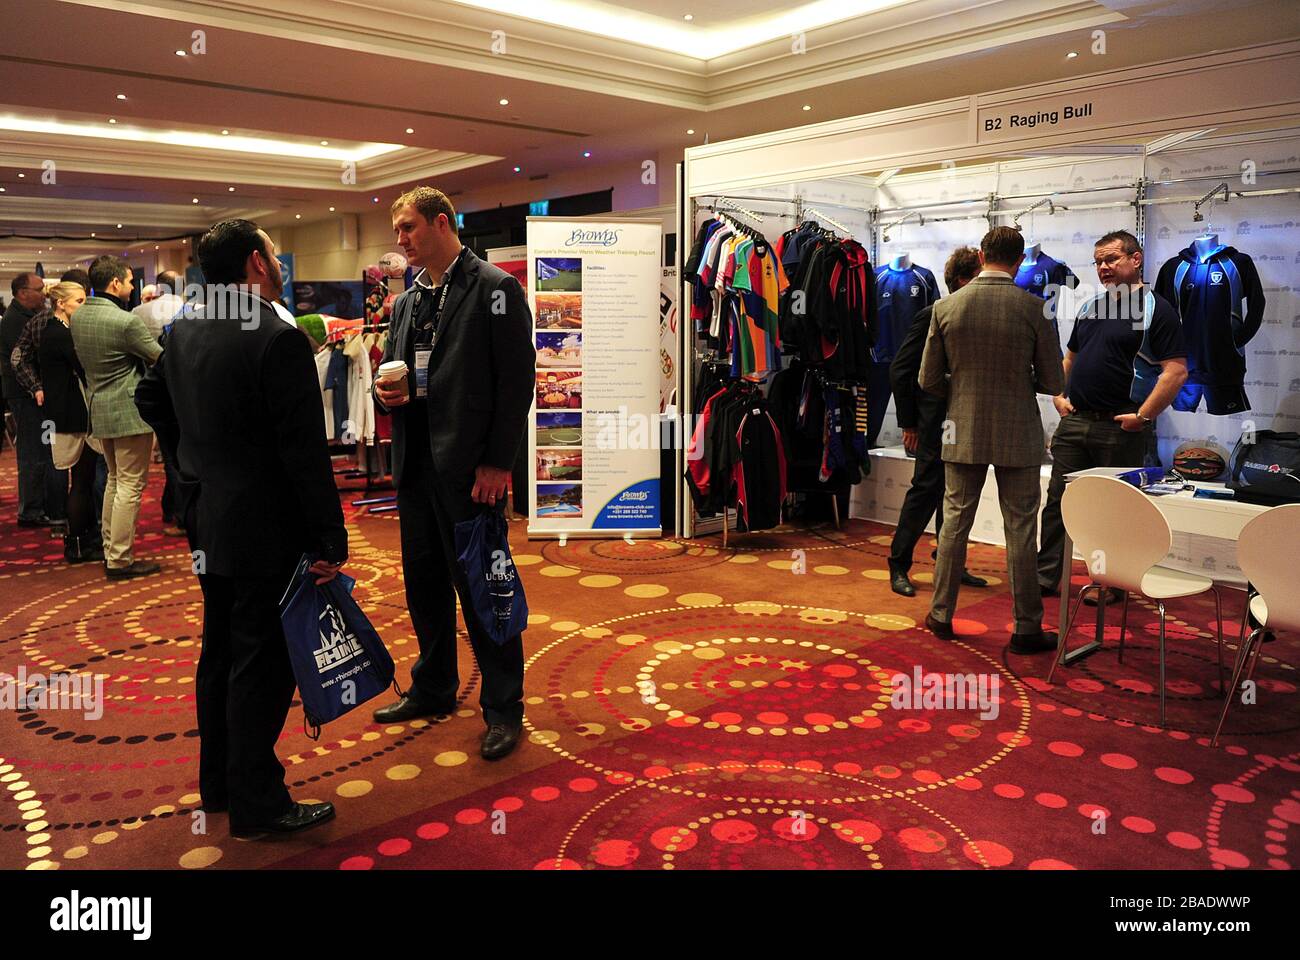 Delegates mingle around the exhibitions in the exhibition hall Stock Photo